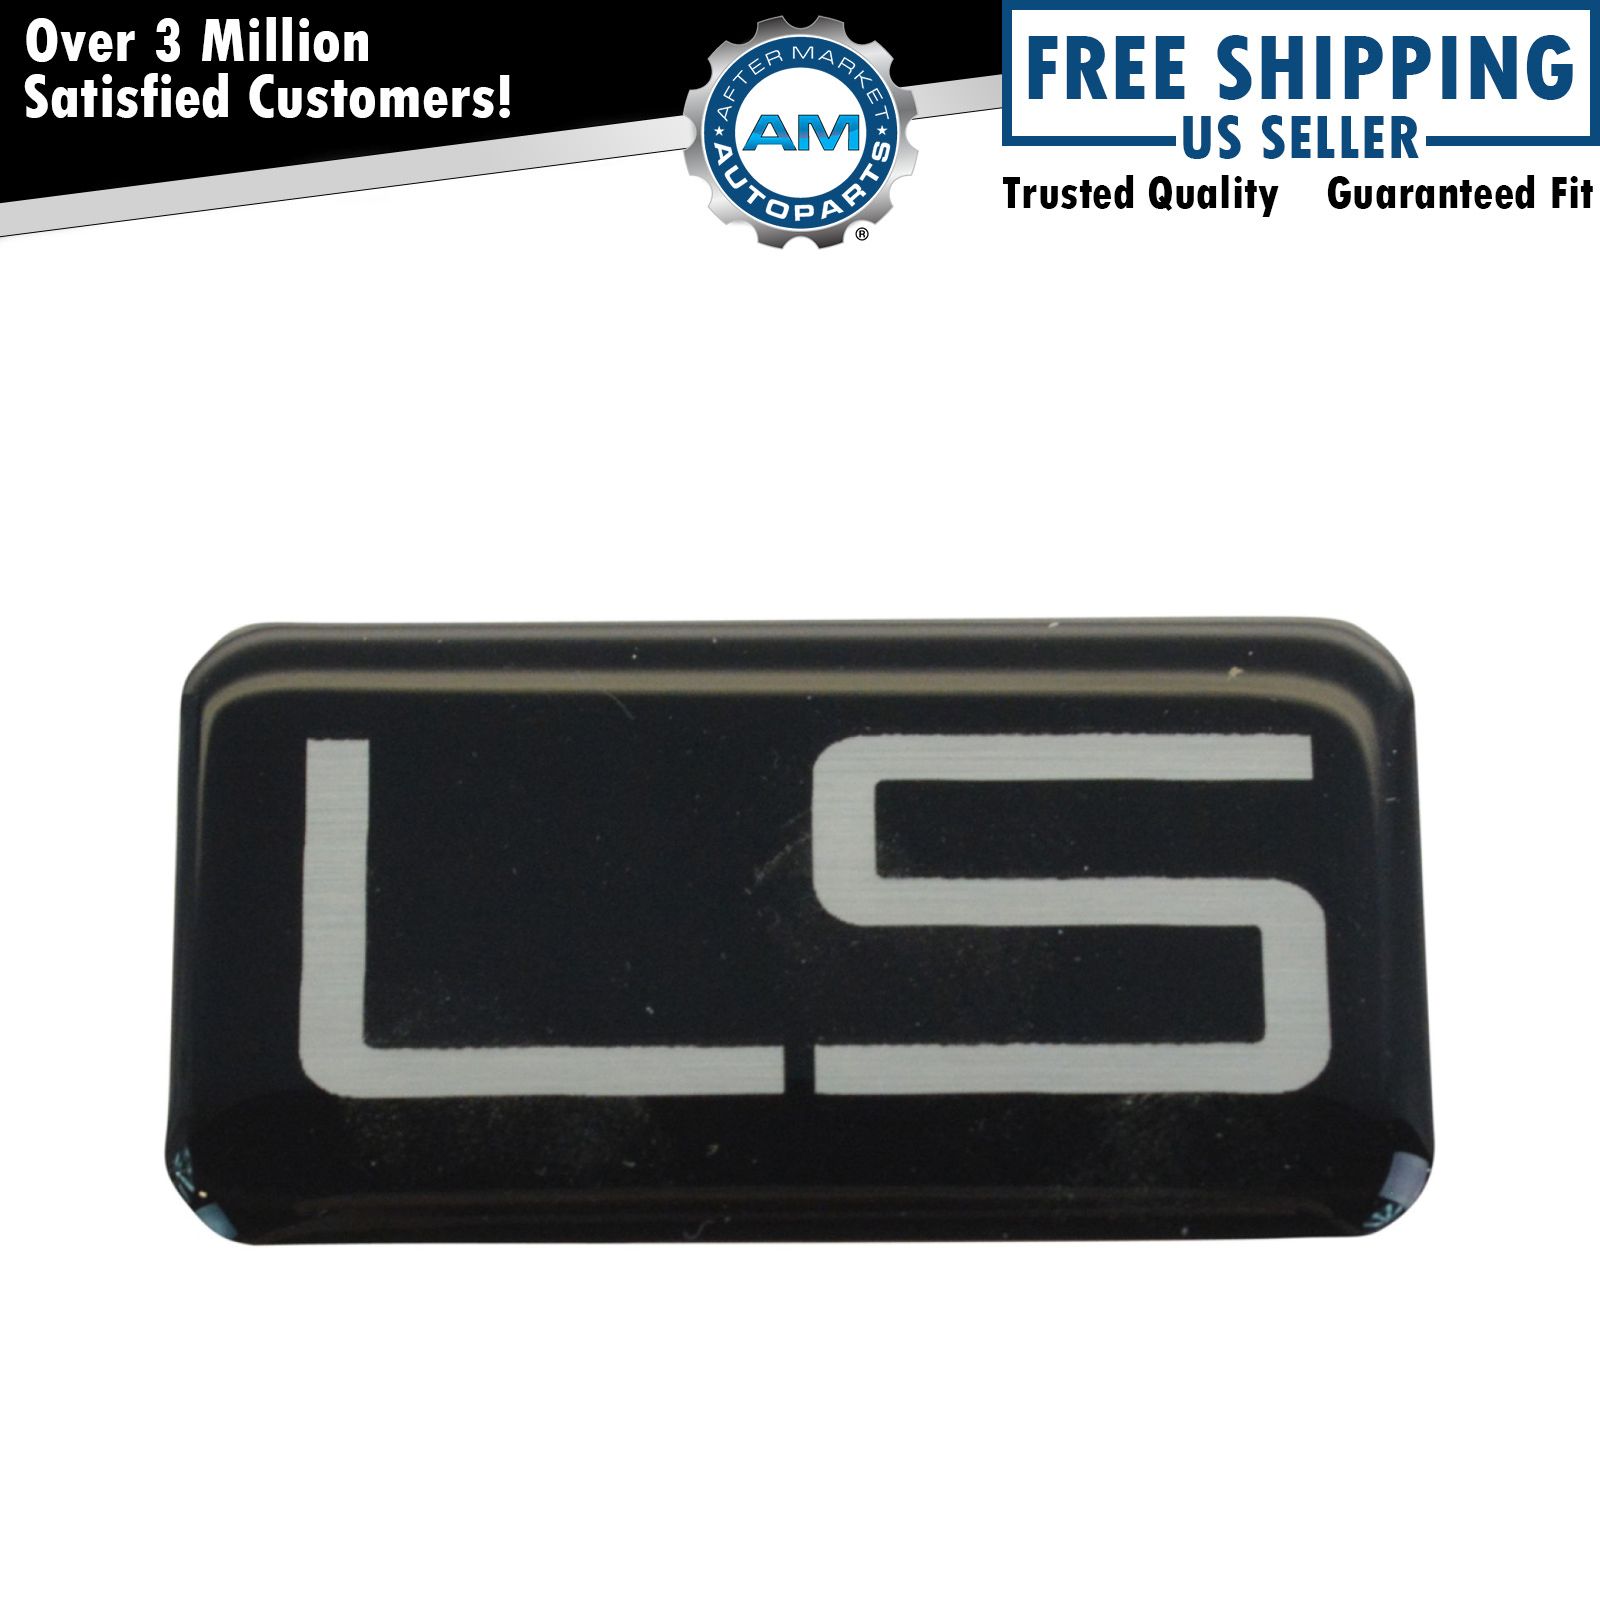 OEM 15678961 LS Nameplate Emblem Black & Silver for Chevy Pickup Truck SUV New